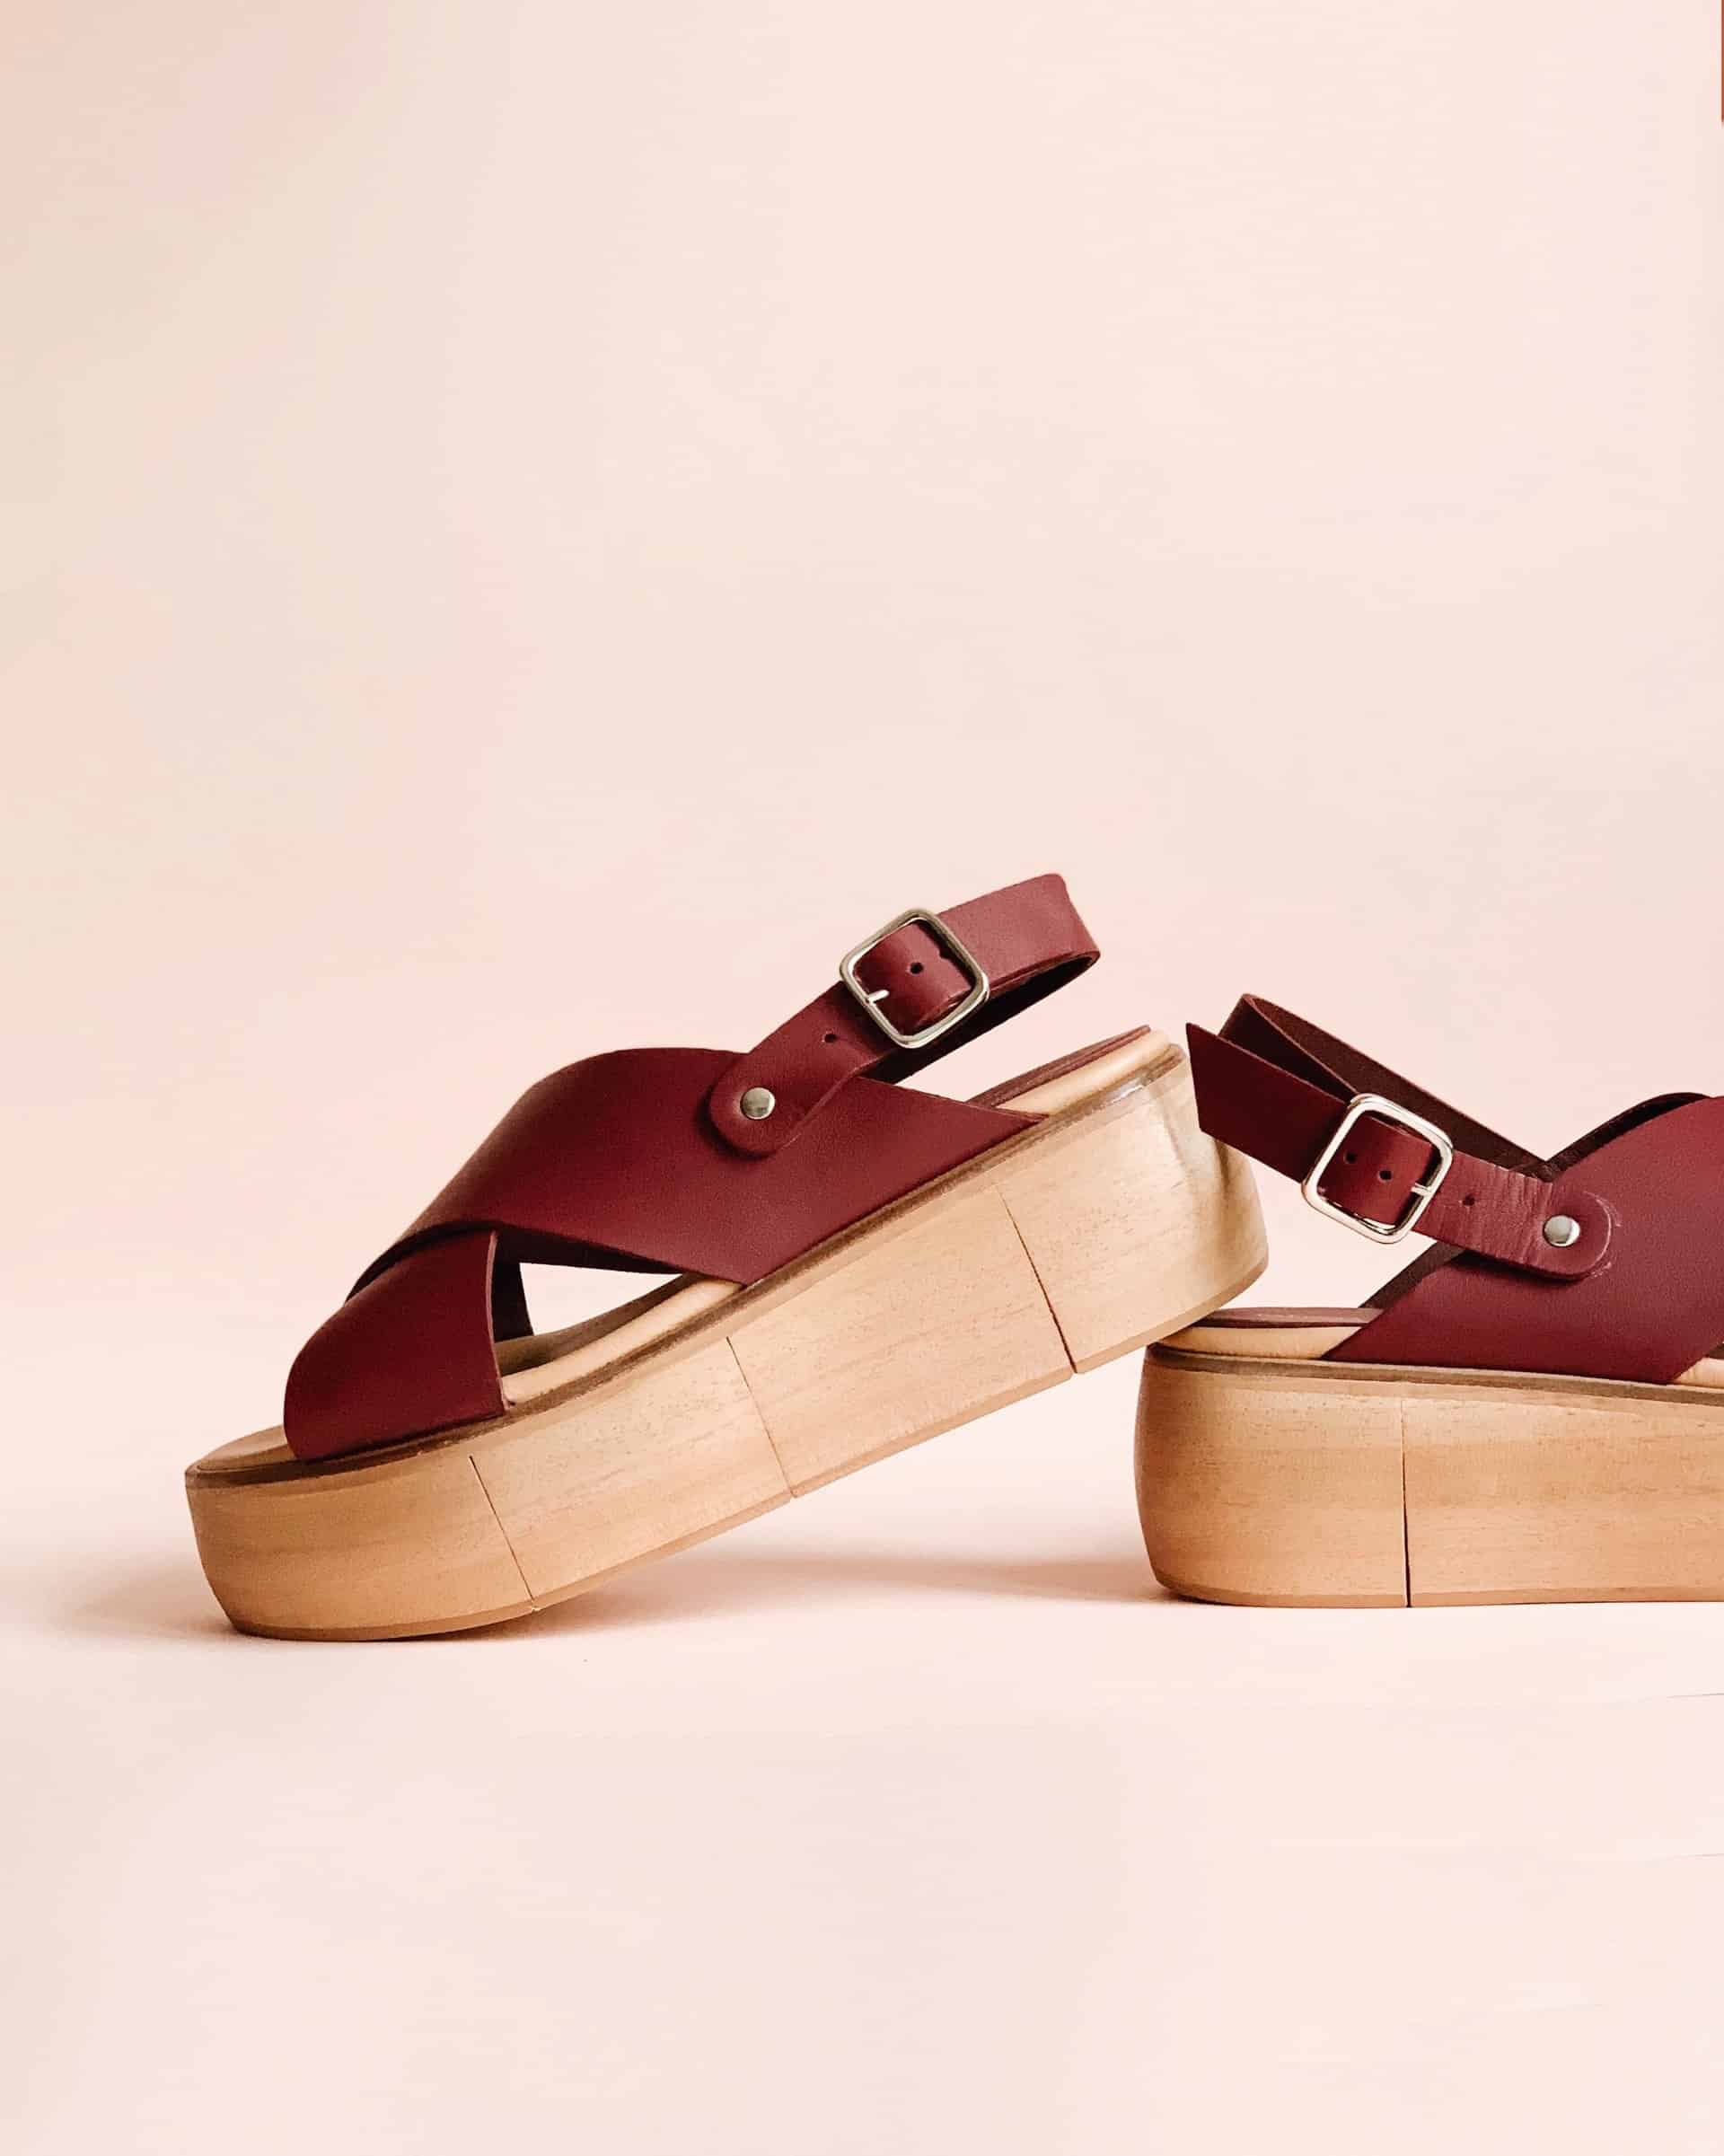 Everyday sandals – what model to decide on this summer?